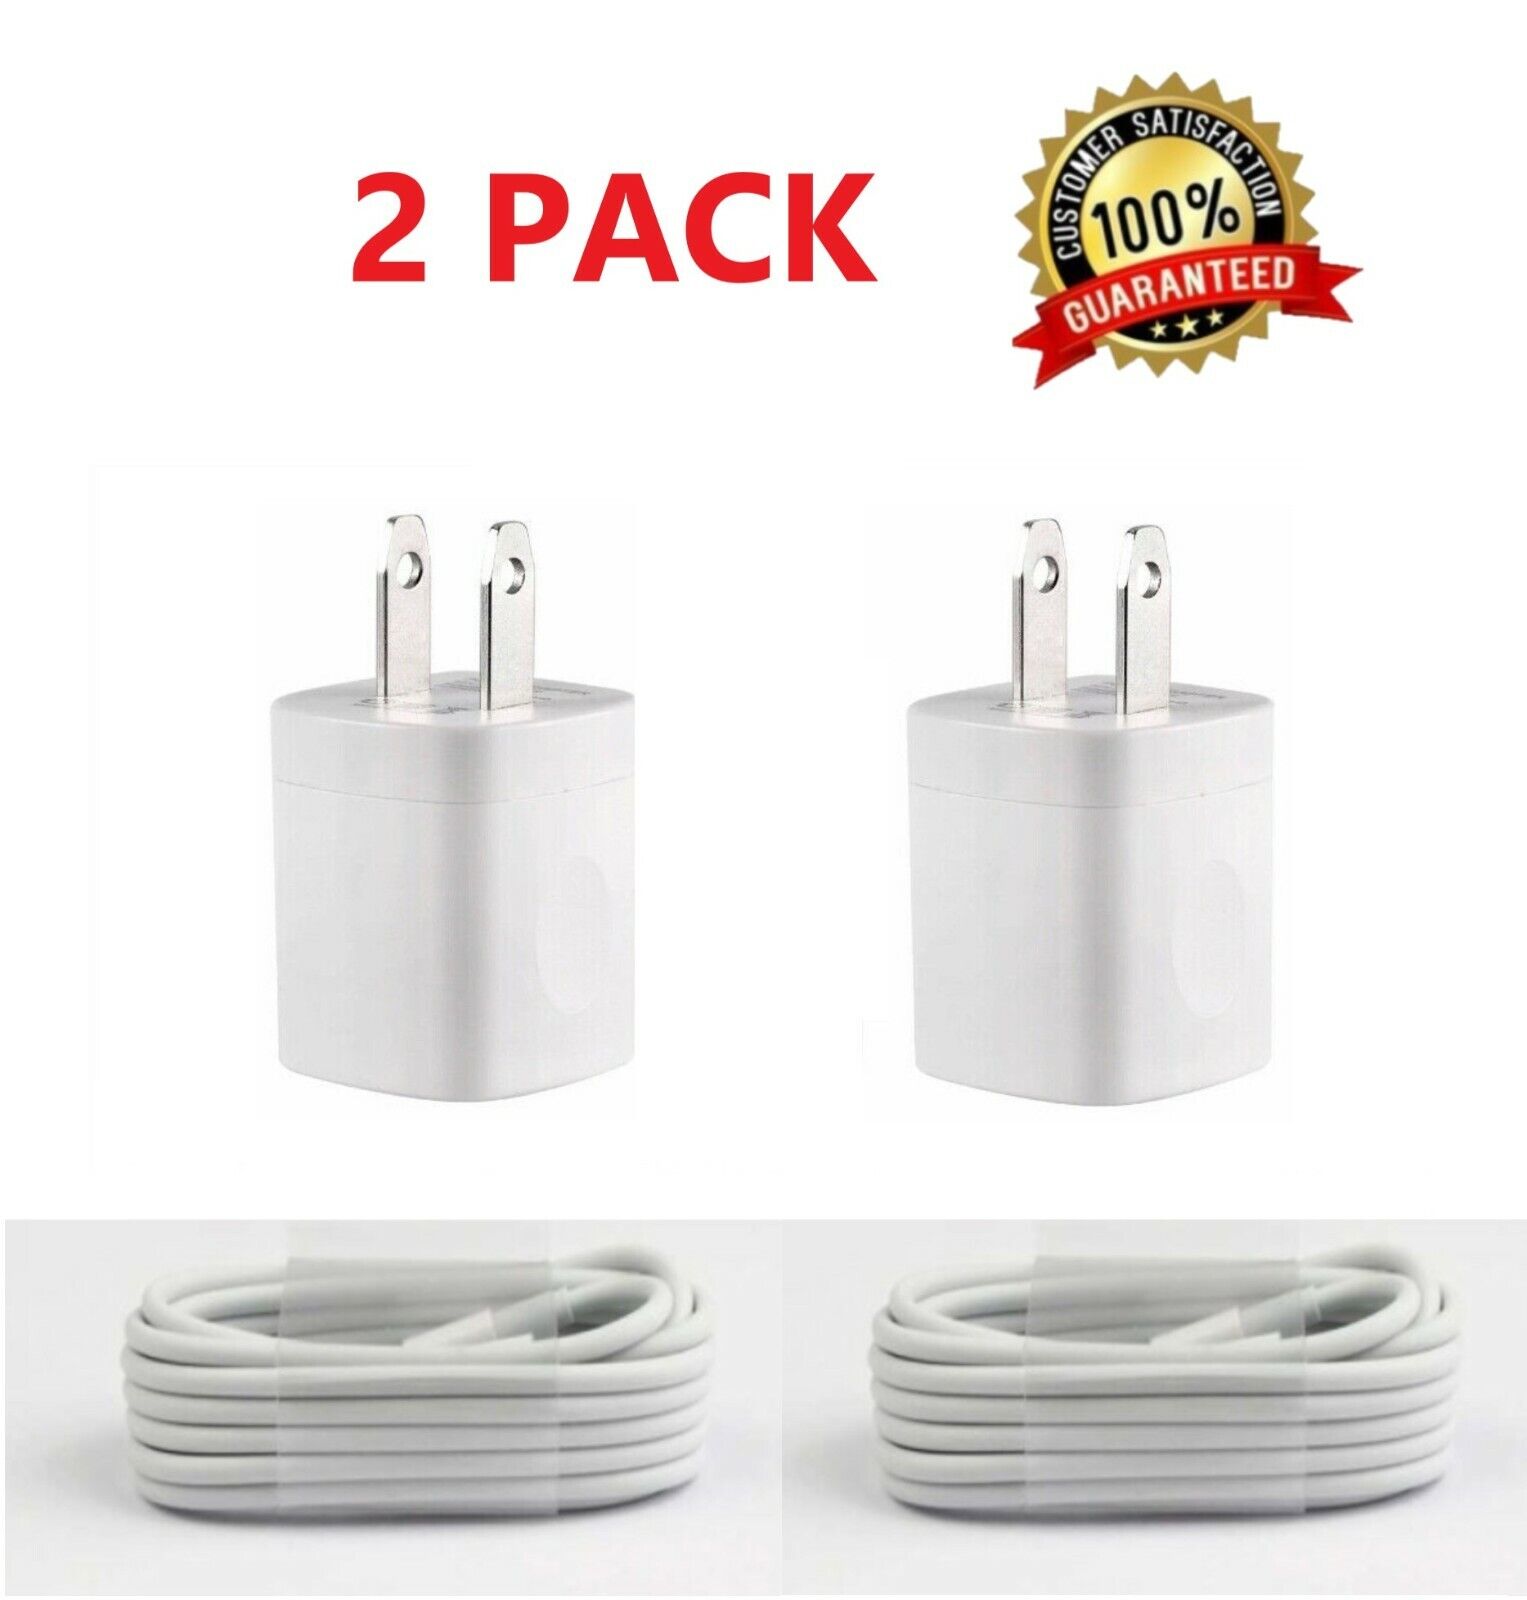 2PACK USB Home AC Wall charger For iPhone X Xs MAX 8 7 6 5 5S Cable EZT Does Not Apply